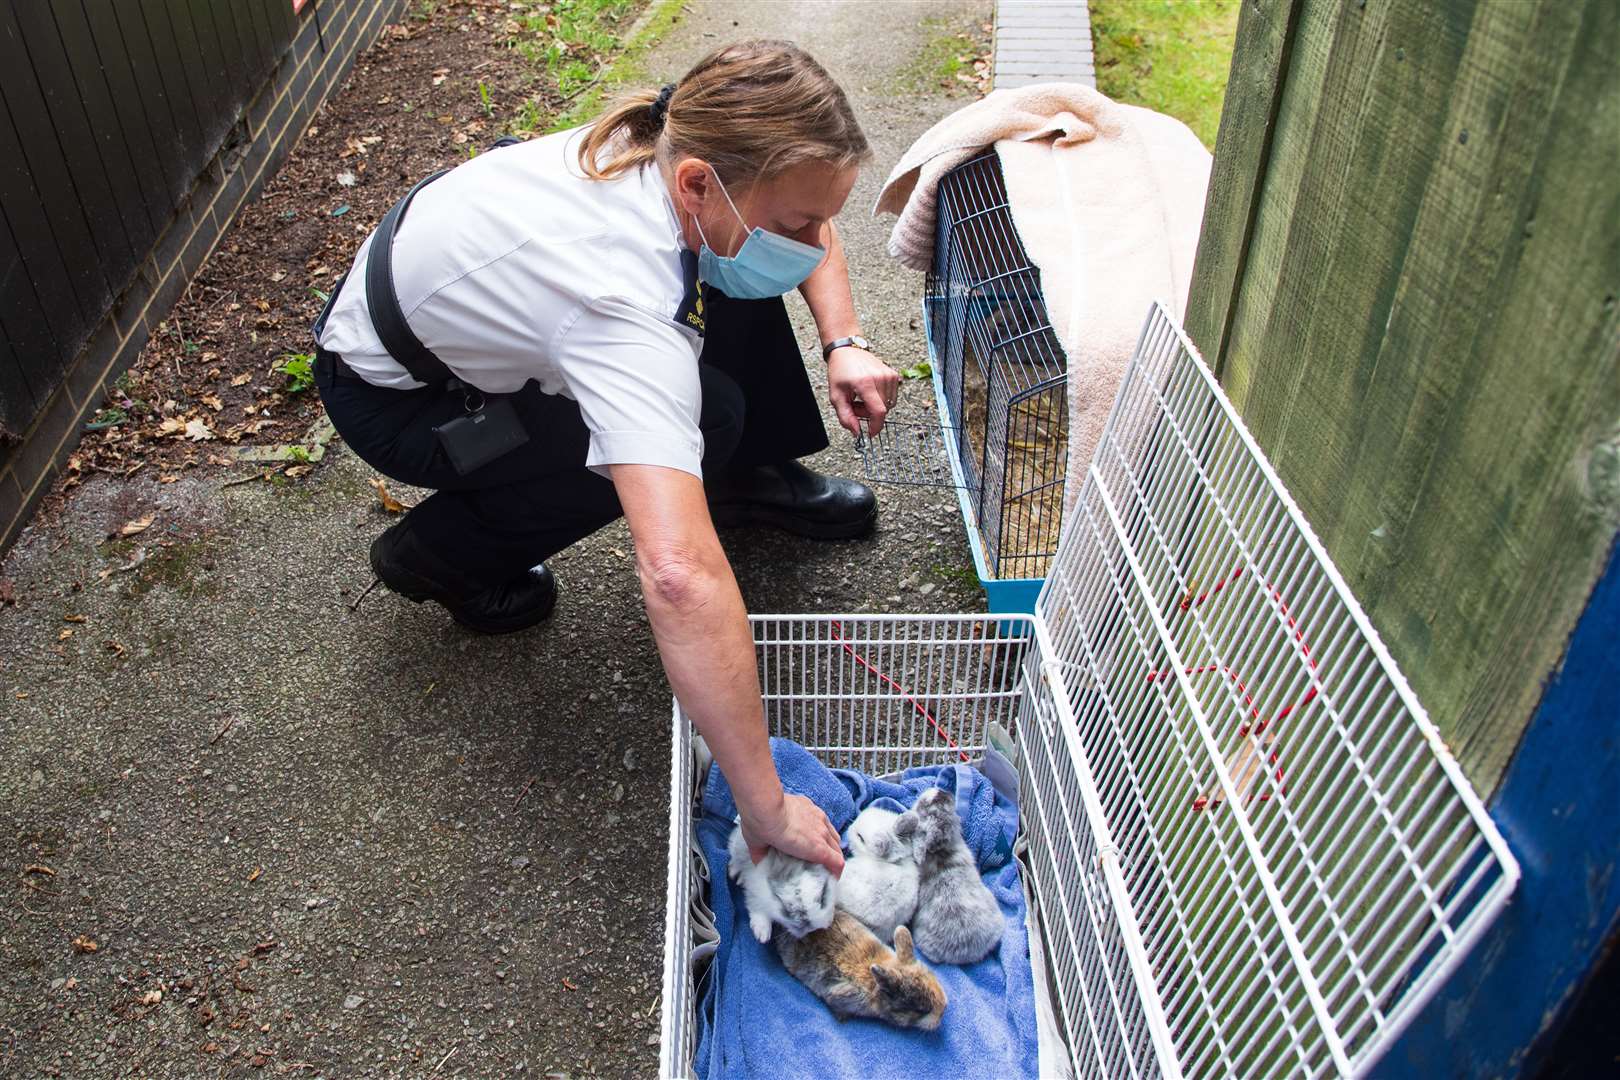 Sadly many of the rabbits had to be put to sleep. Picture:RSPCA